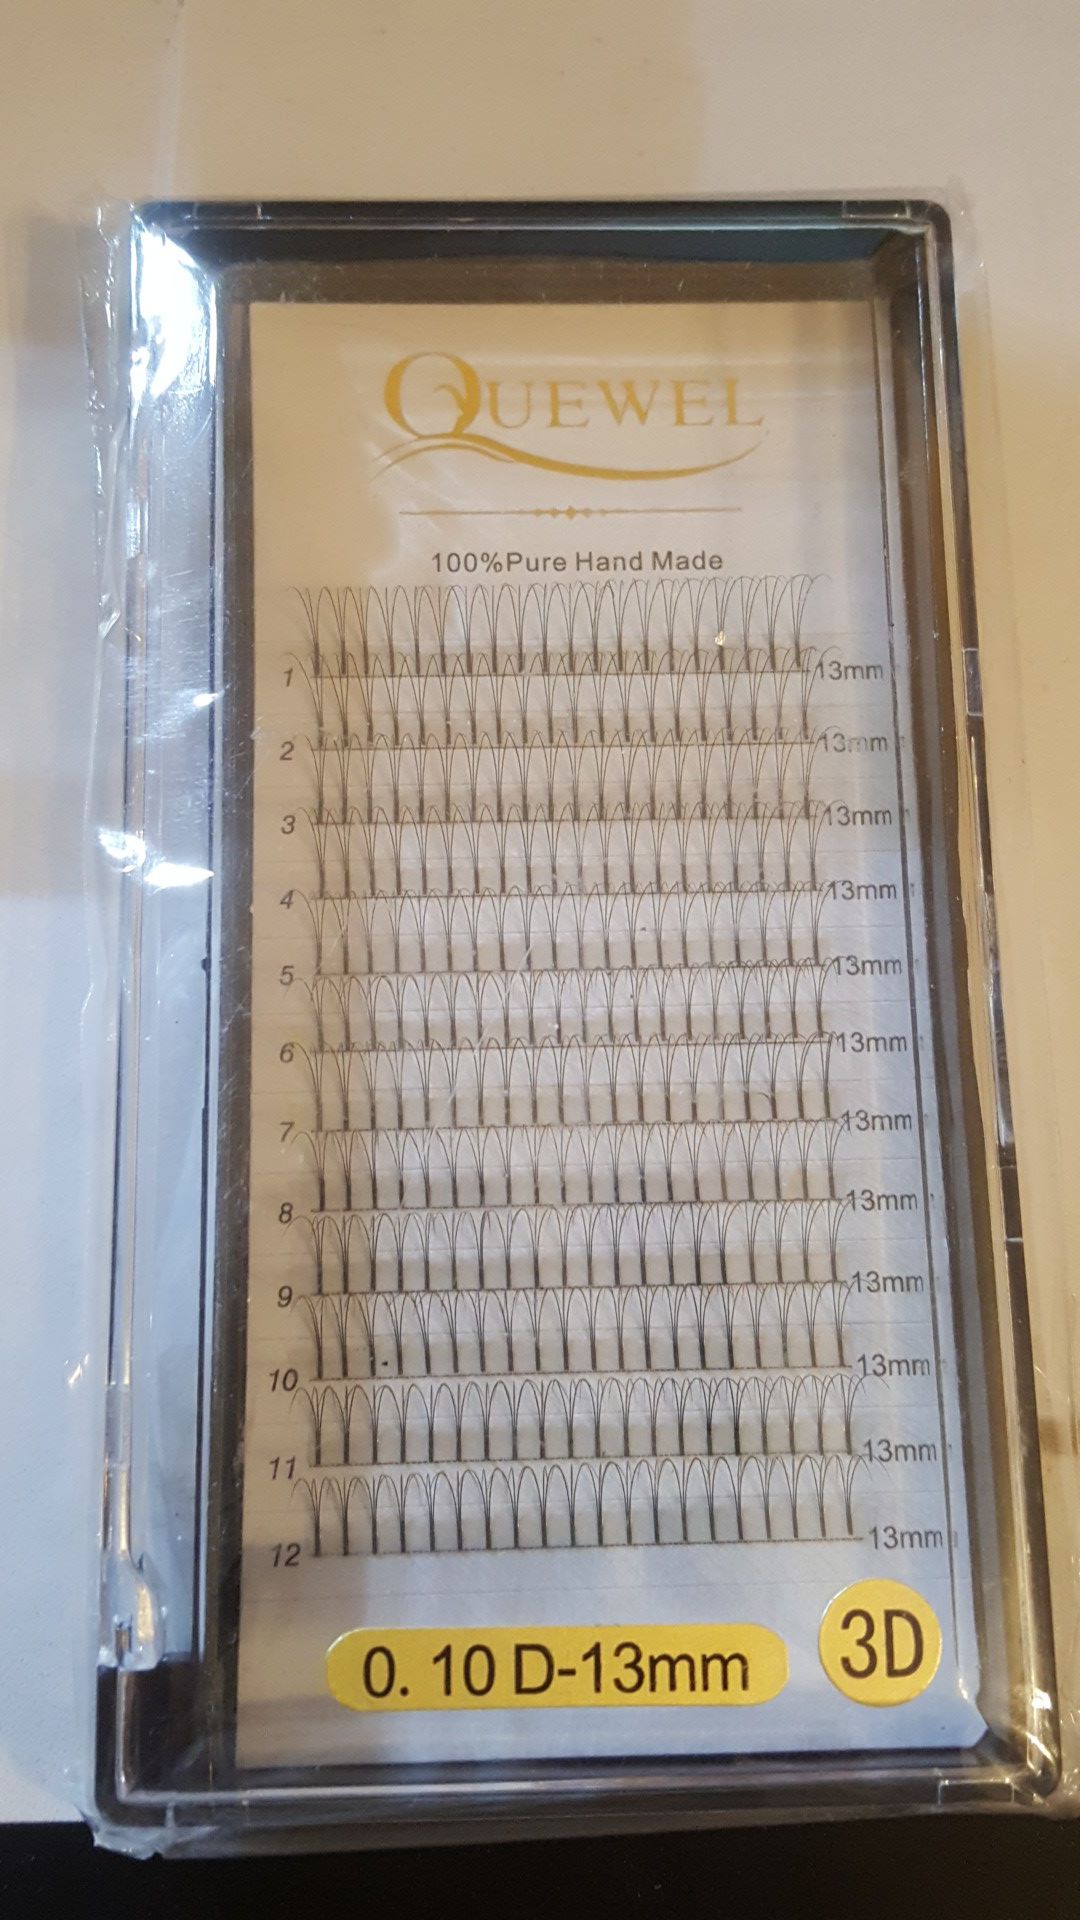 Quewel 100% Pure Hand Made Lashes 0.10 D-13mm Brand New